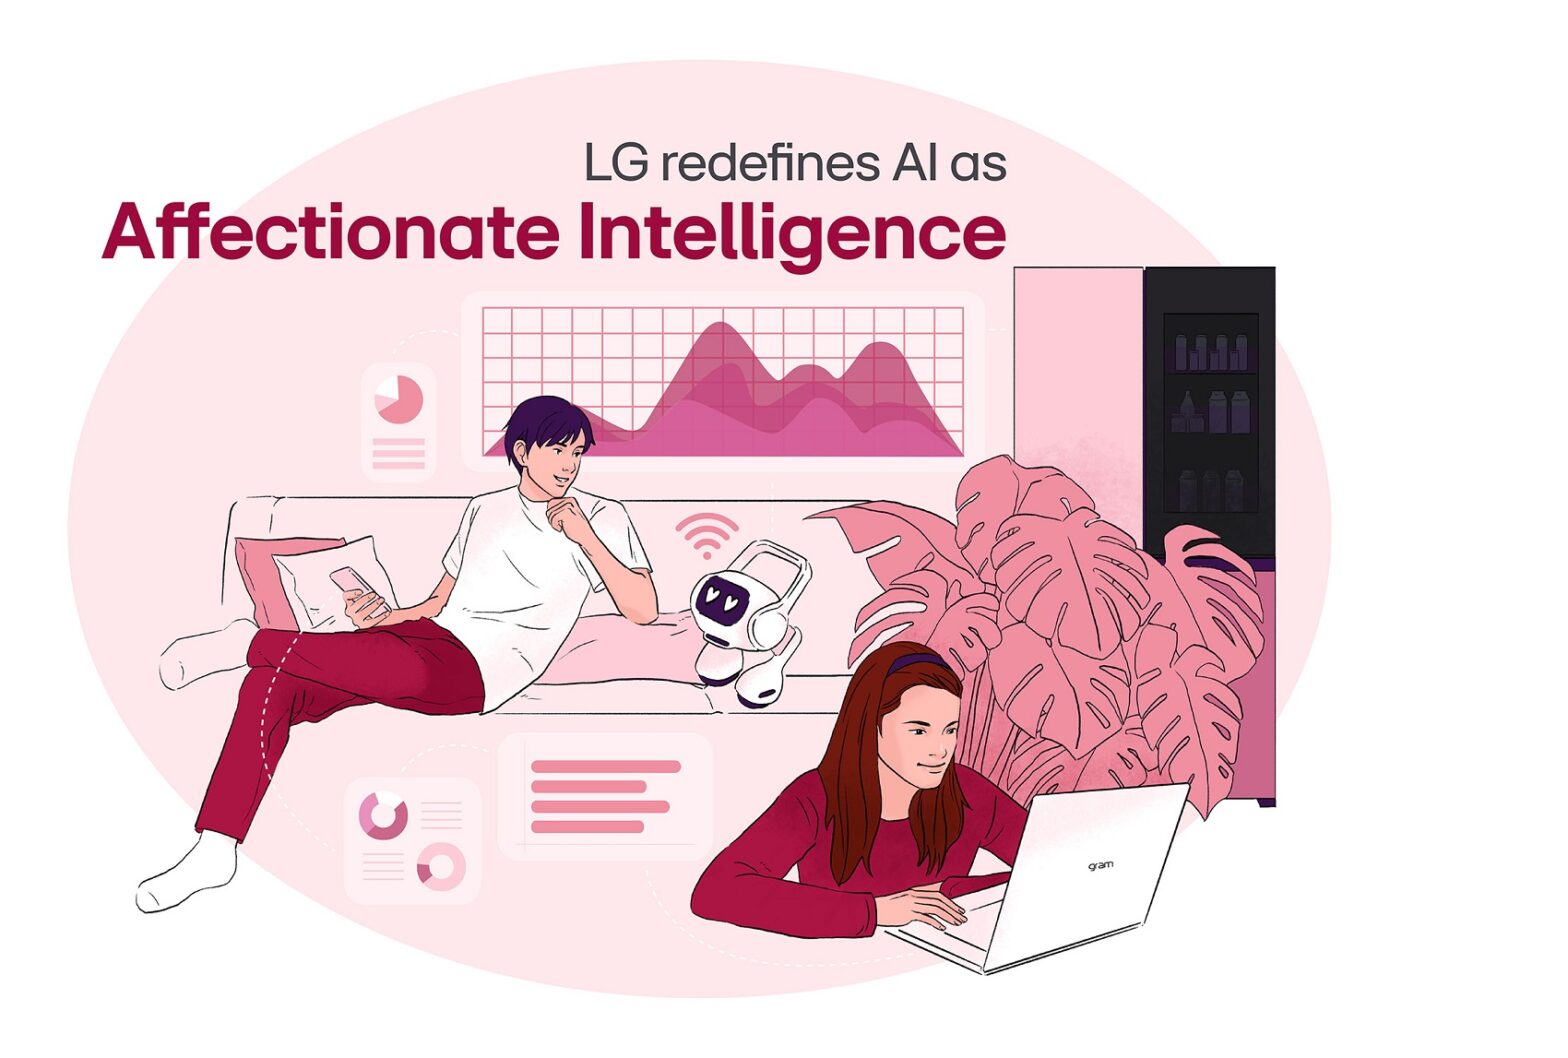 An illustration a man and a woman with LG products and the words 'LG redefines AI as Affectionate Intelligence'